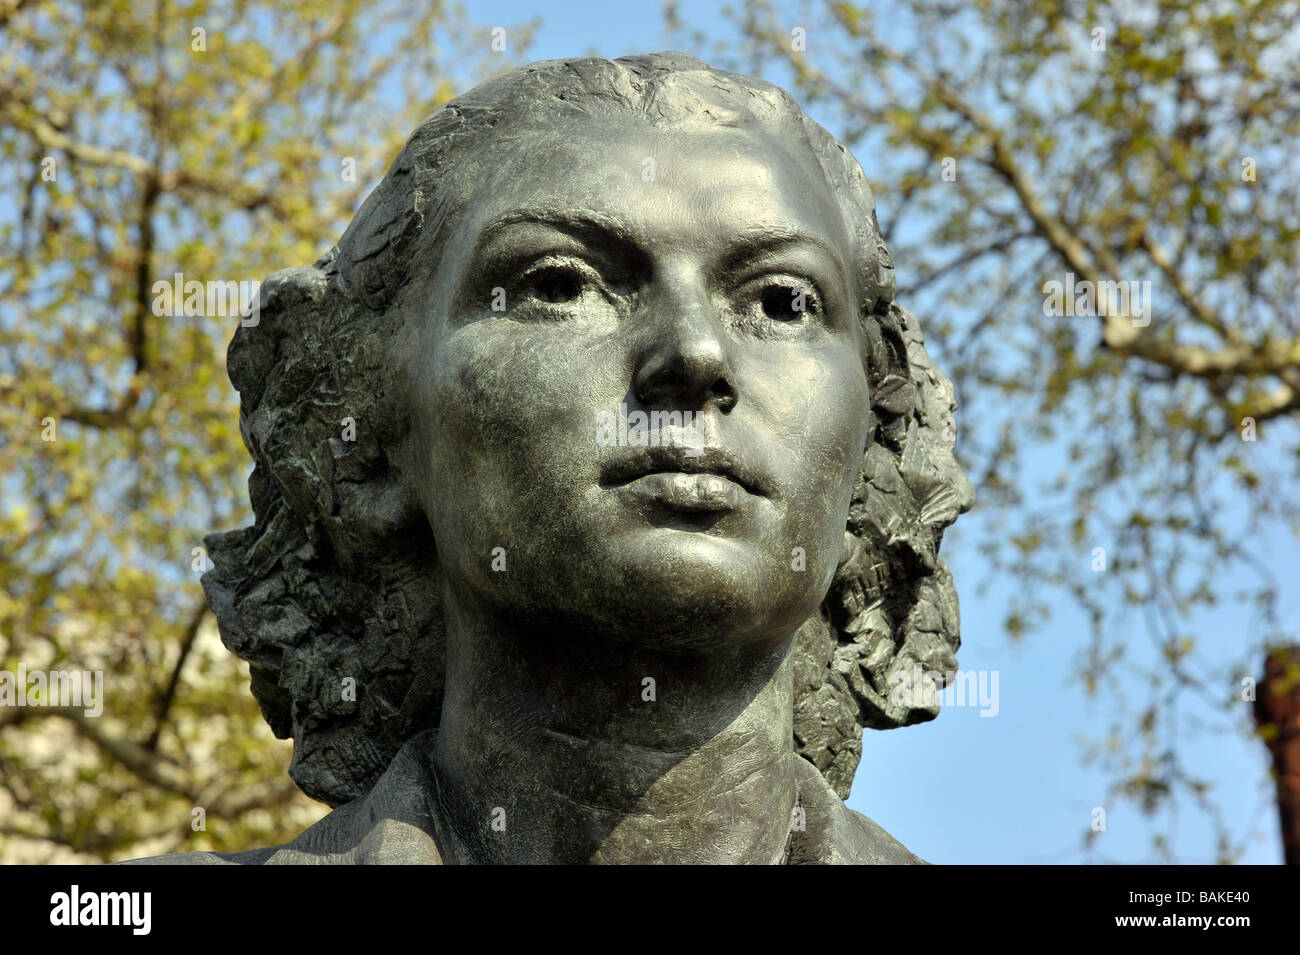 Violette Szabo High Resolution Stock Photography and Images - Alamy